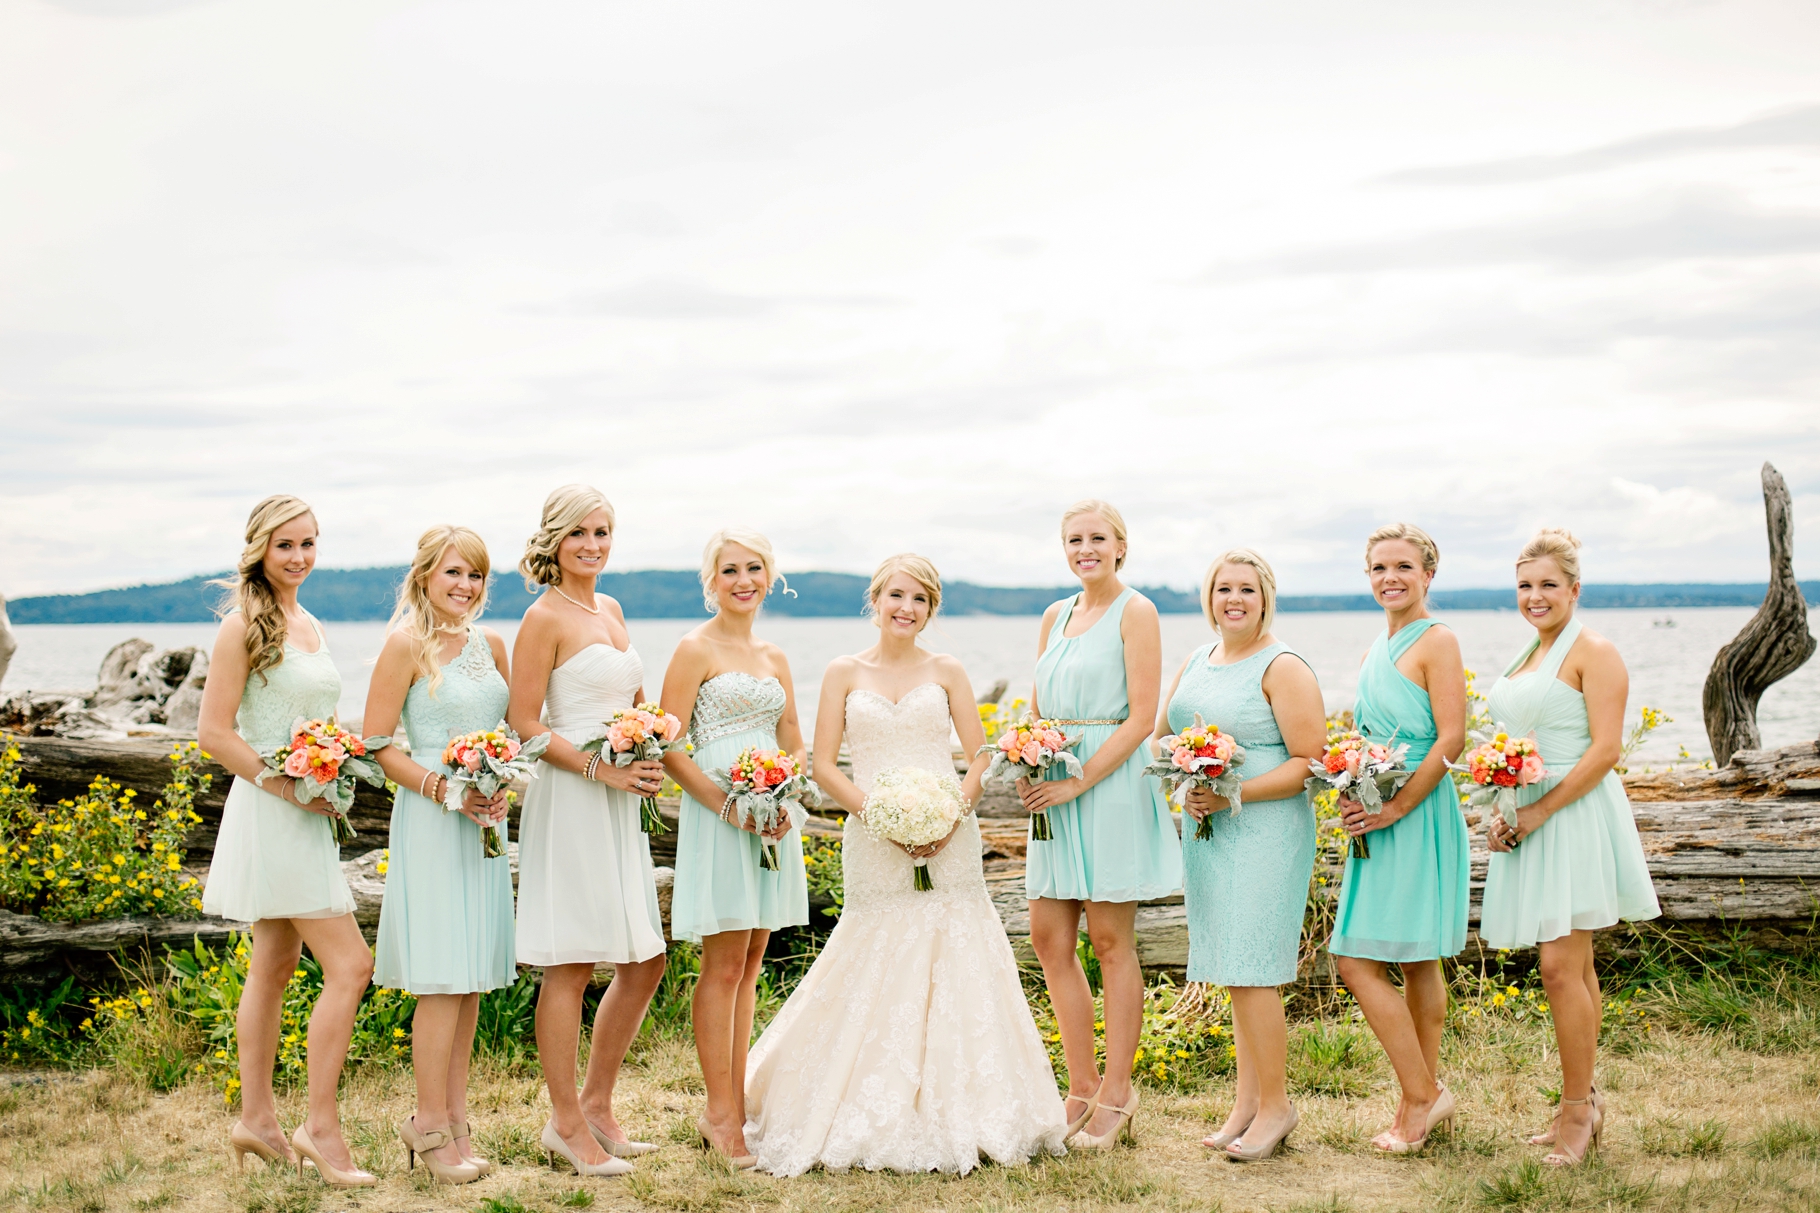 21-Bridesmaid-Bride-Portraits-Bouquets-Colorful-Dusty-Miller-Love-Blooms-Events-Florist-Waterfront-Pudget-Sound-Driftwood-Normandy-Cove-Beach-Wedding-Photographer-Bride-Groom-Seattle-Wedding-Photography-Northwest